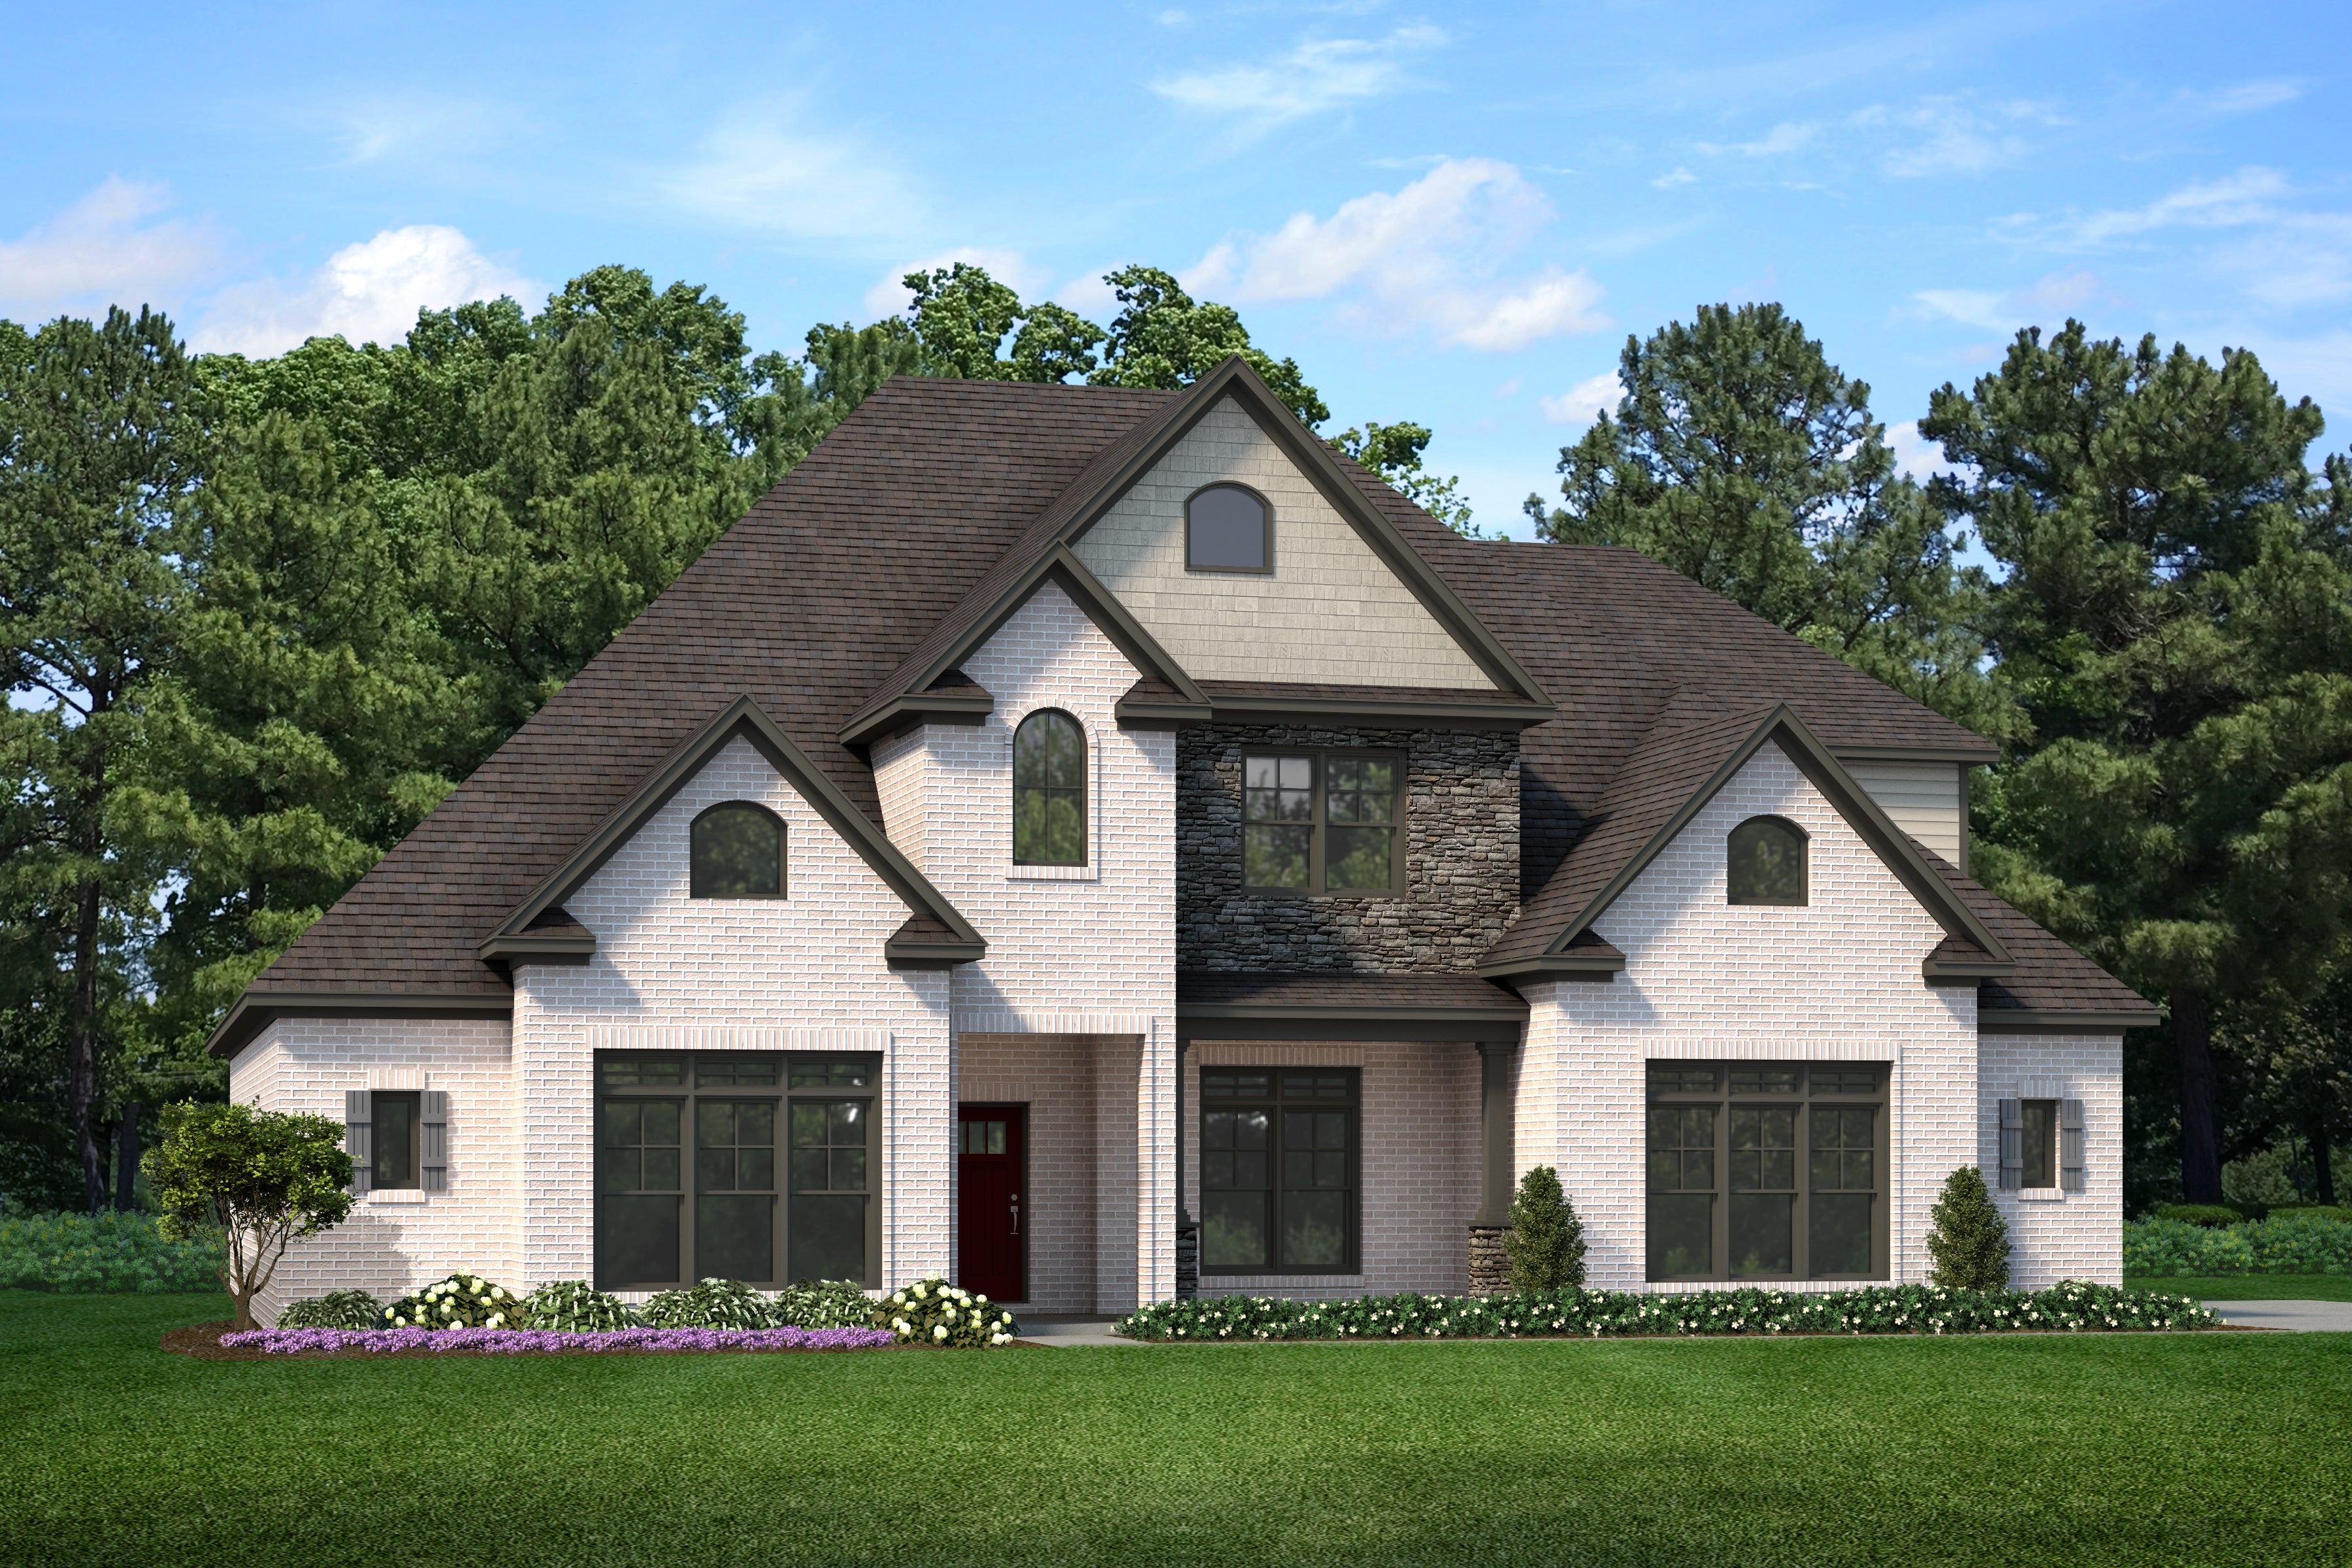 Elevation A. 3,753sf New Home in Meridianville, AL